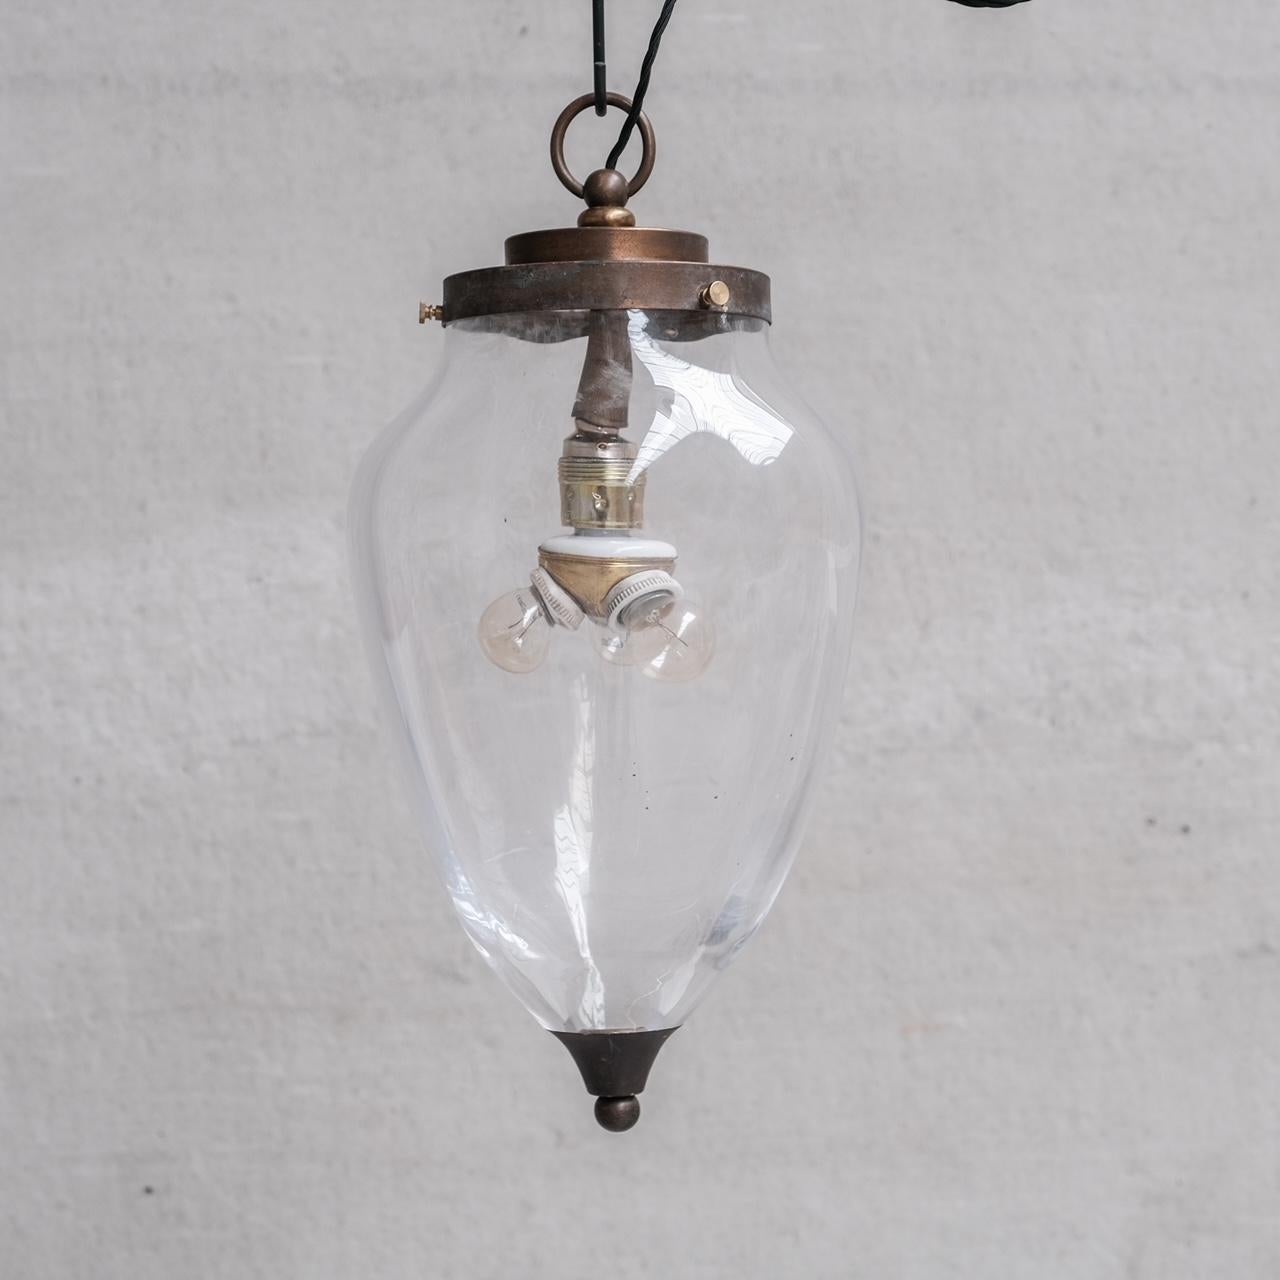 A large clear glass and brass pendant light. 

Holland, c1950s. 

Thick glass, stepped brass gallery, with natural patination. 

Added addition of a period bulb extender option to make it a three bulb light. 

Please note this is a period electrical